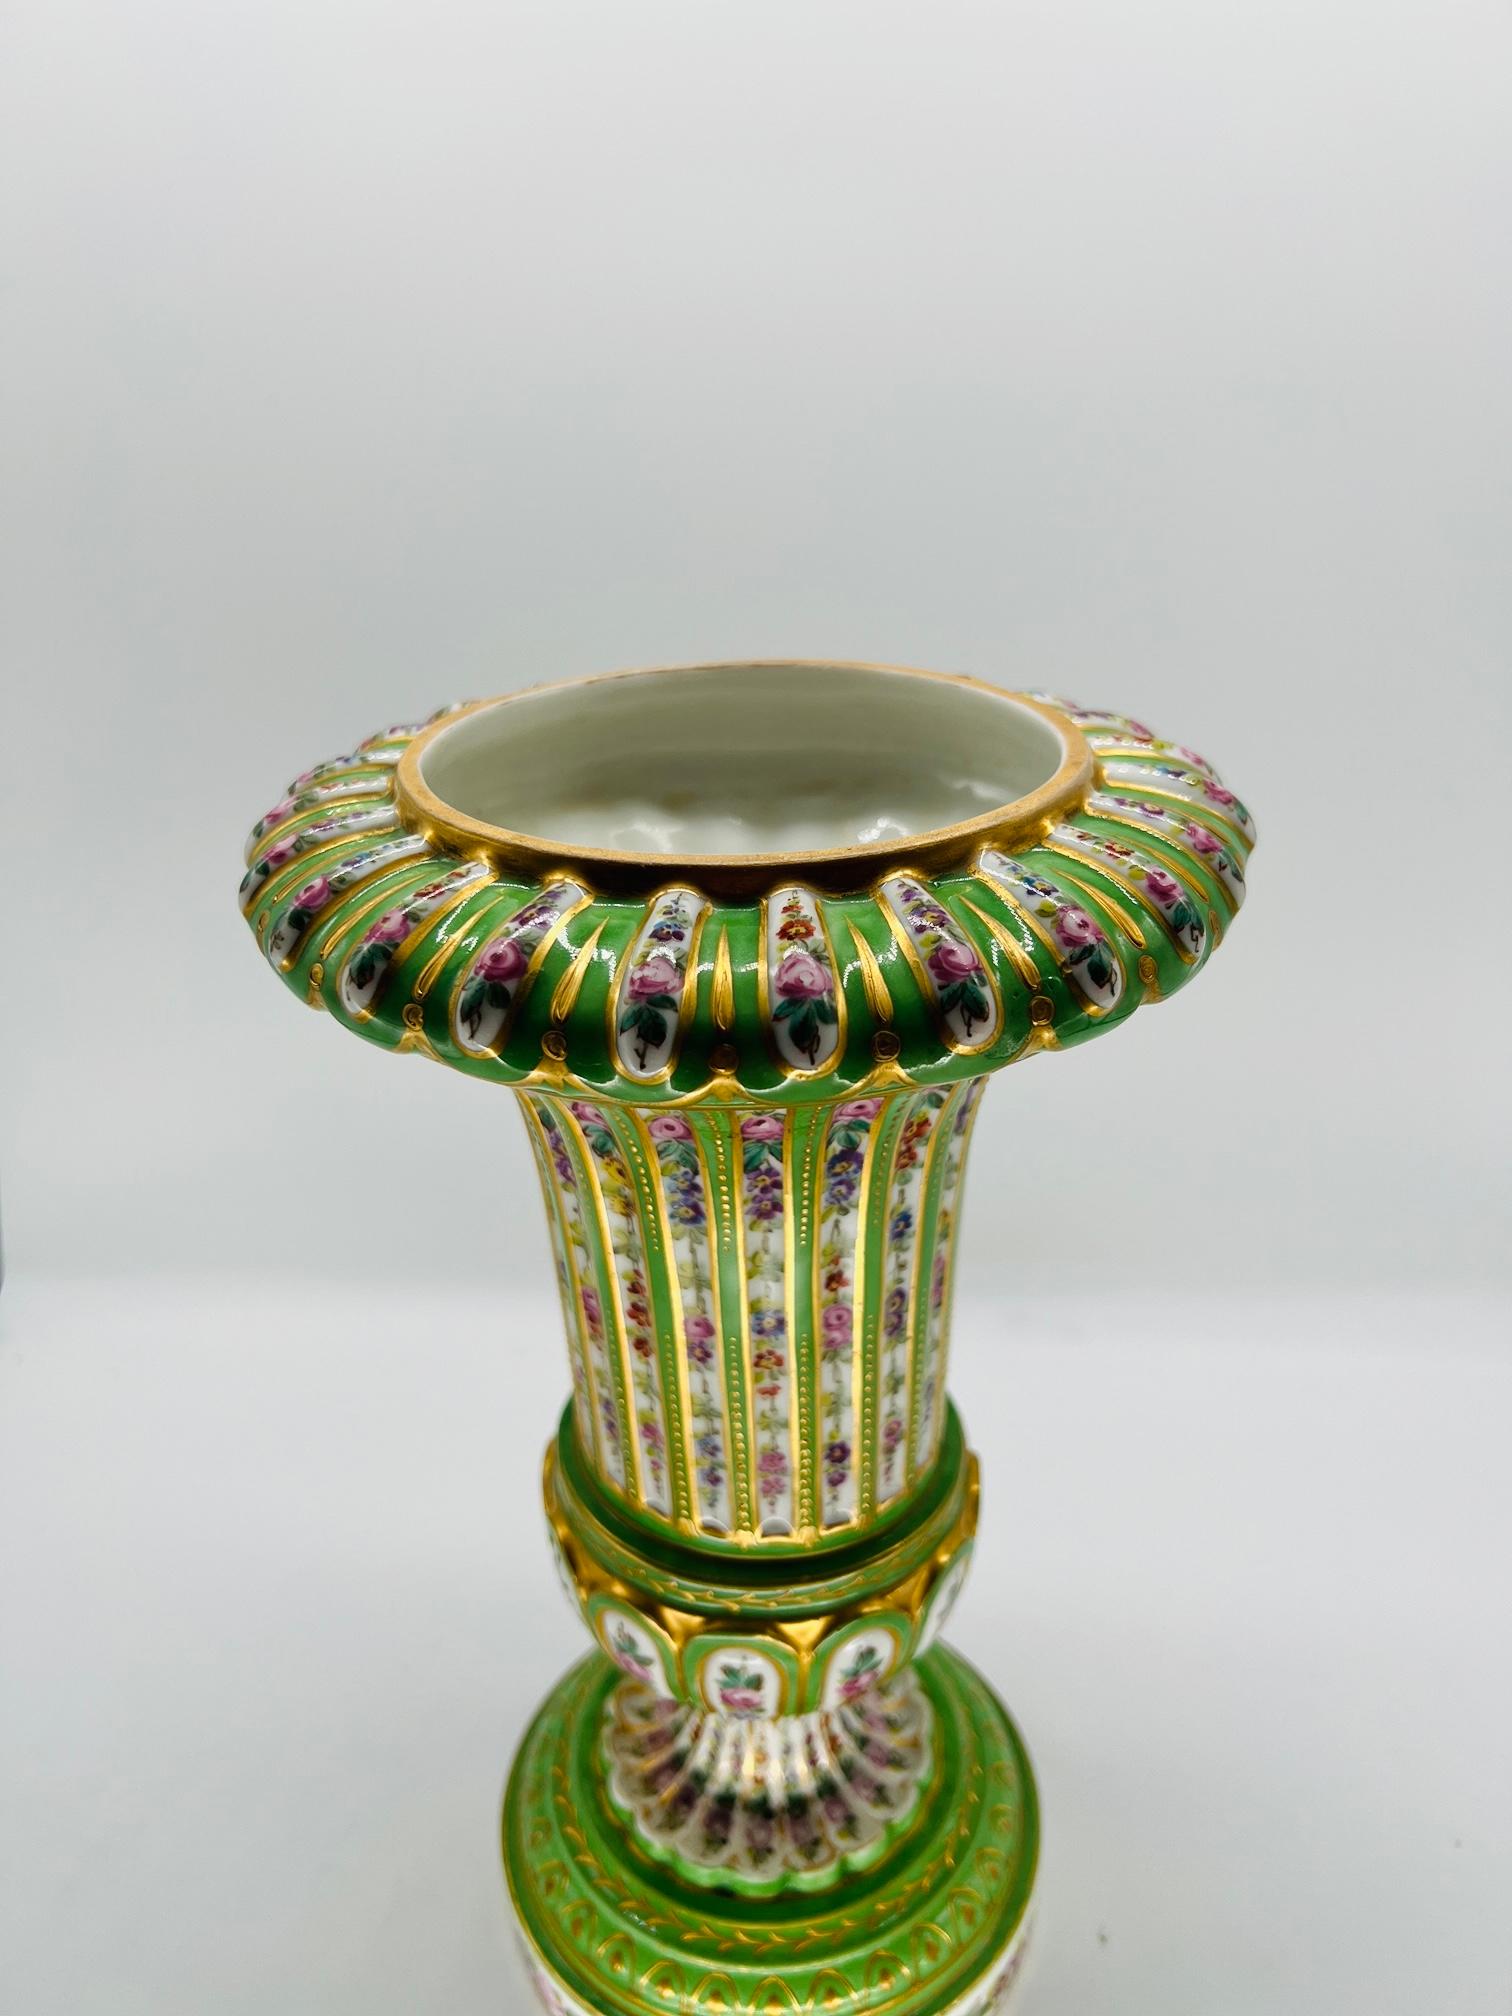 Sevres (French, founded 1756), marked for 1770.

An antique French porcelain urn or vase decorated with a green porcelain base, white ground windows featuring heavy floral decorations and separated by fine gold bead work. The top with gold swag